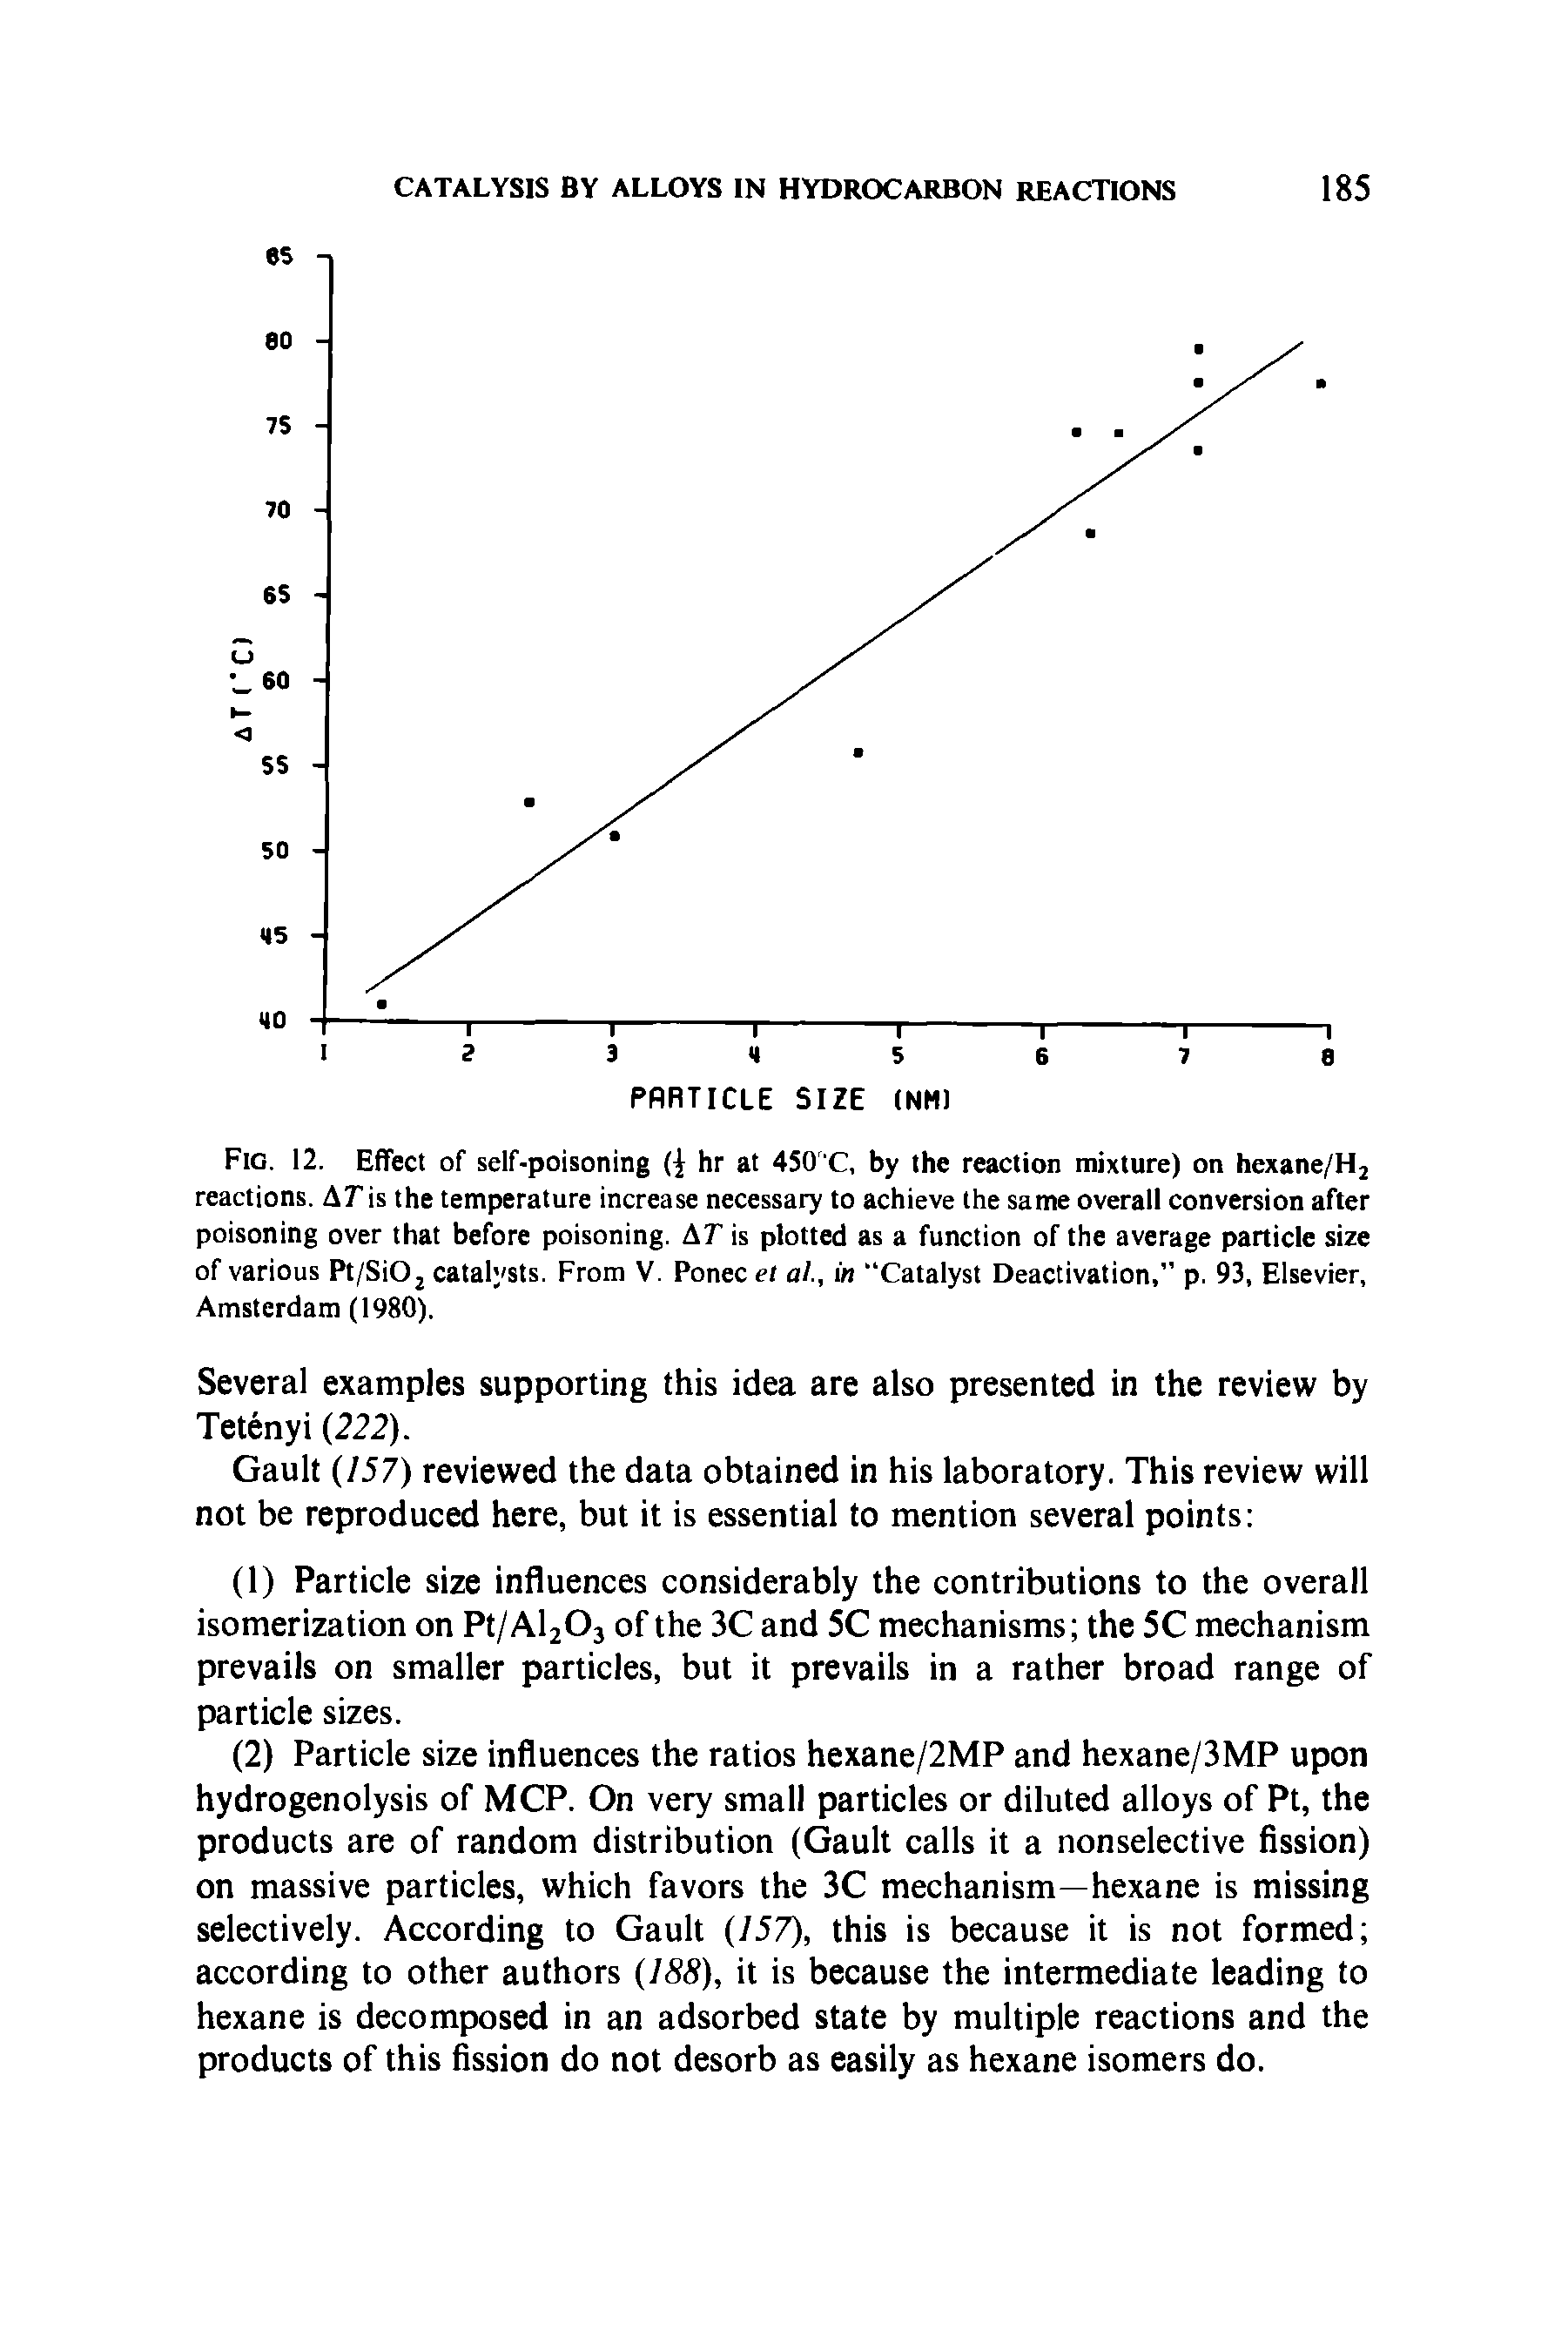 Fig. 12. Effect of self-poisoning (i hr at 450 C, by the reaction mixture) on hexane/H2 reactions. AT is the temperature increase necessary to achieve the same overall conversion after poisoning over that before poisoning. AT is plotted as a function of the average particle size of various Pt/SiO2 catalysts. From V. Ponec et al, in Catalyst Deactivation, p. 93, Elsevier, Amsterdam (1980).